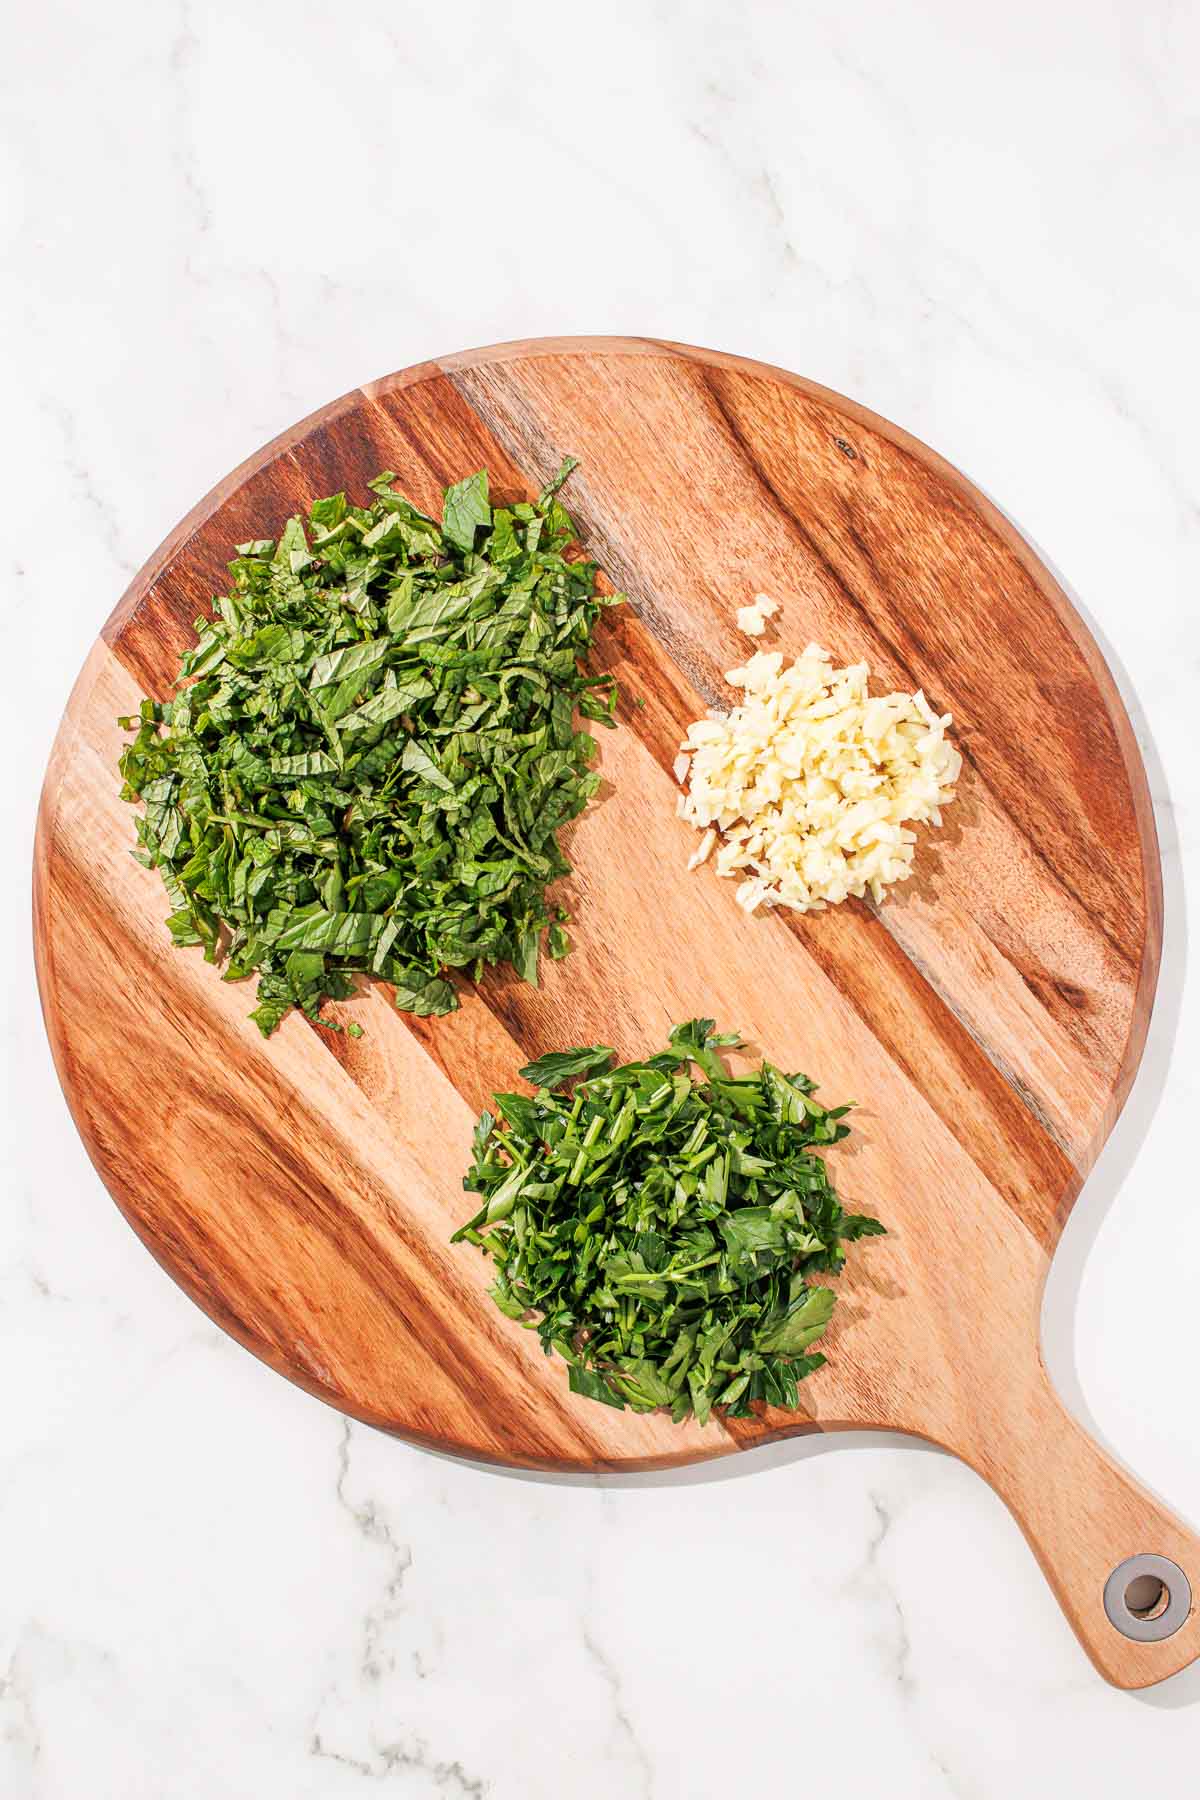 Minced garlic and chopped herbs on a wooden cutting board.